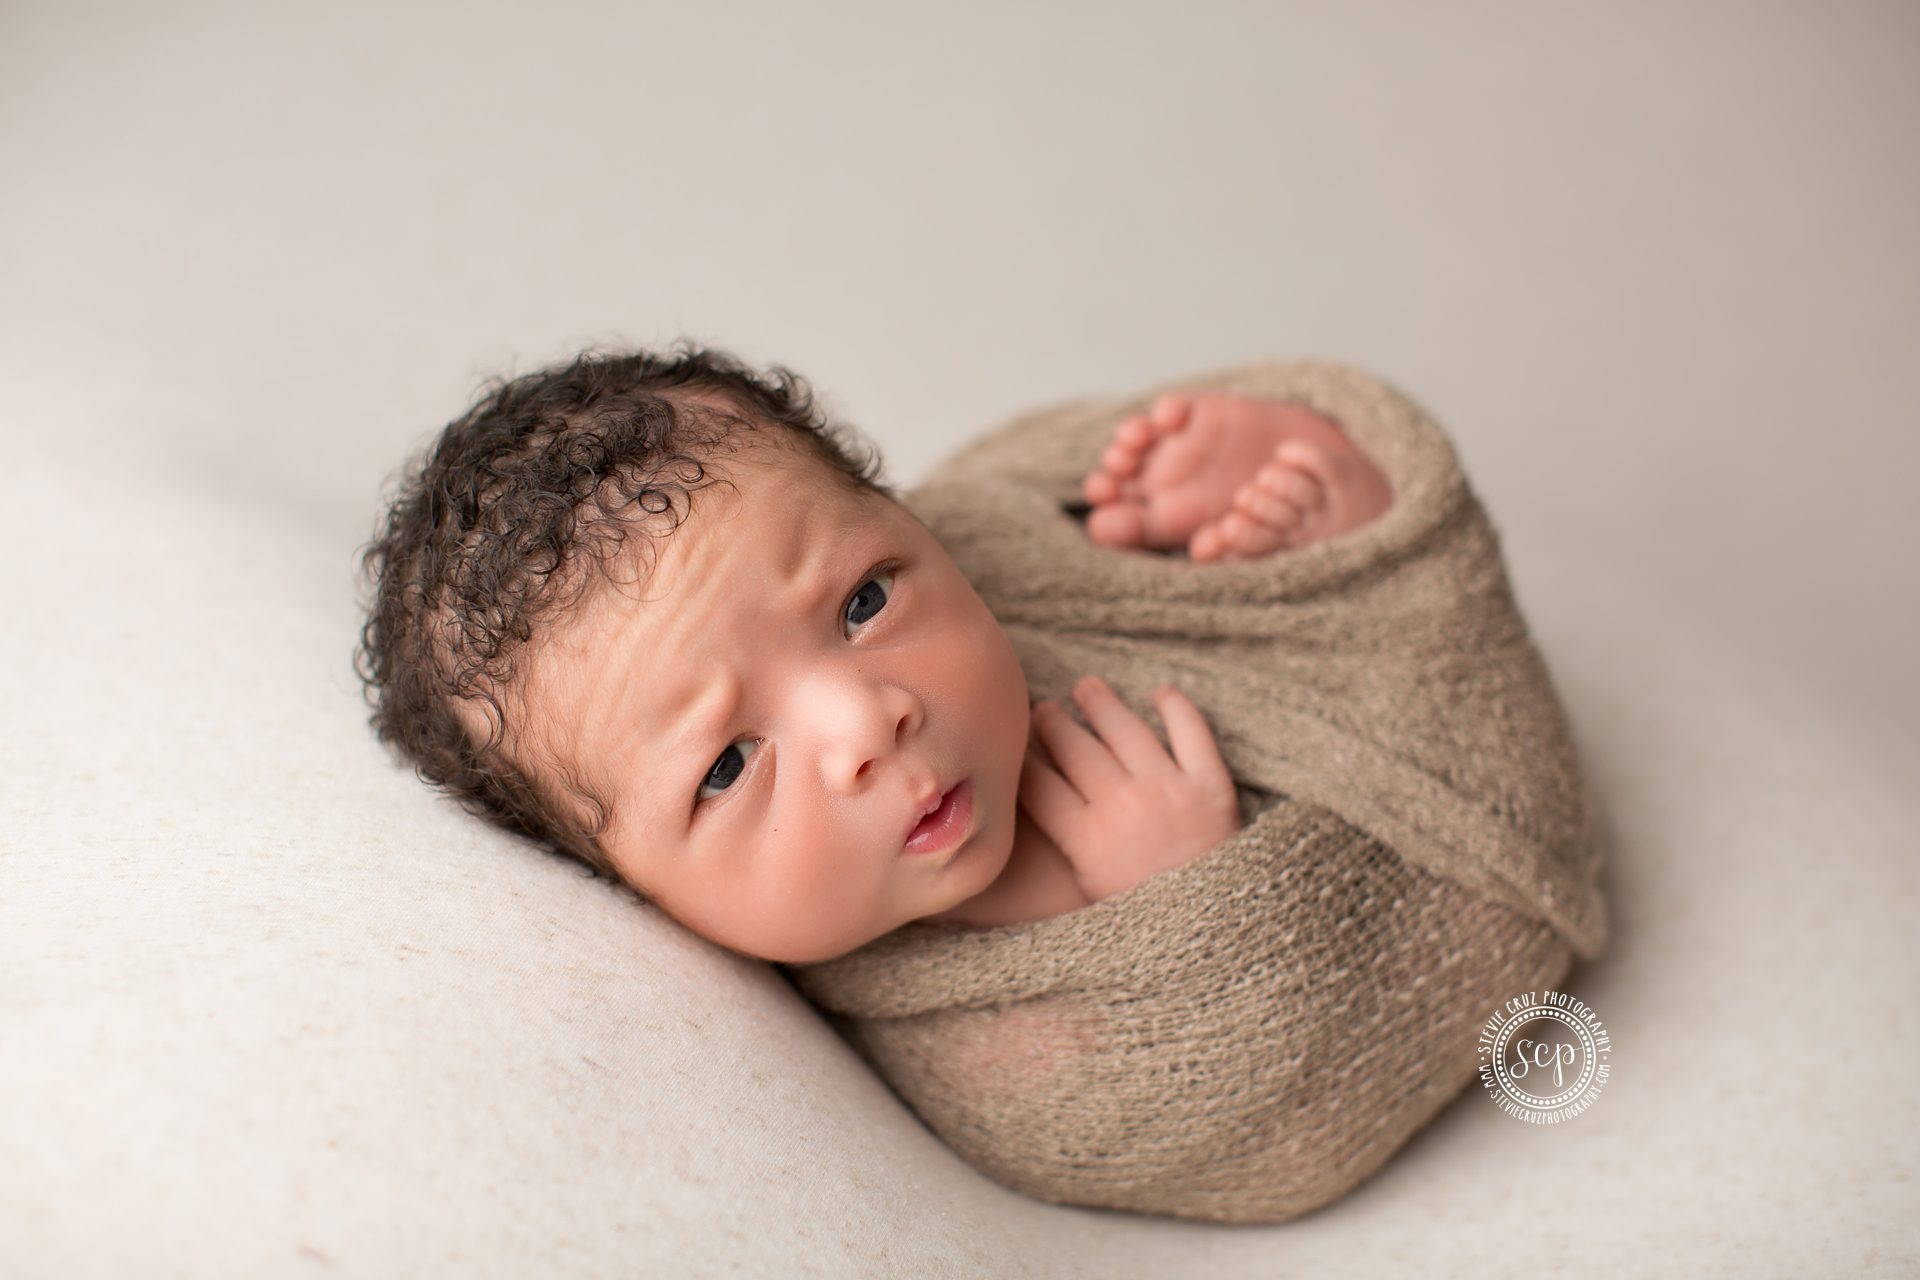 how cute is this newborn baby boy during his photo shoot? Captured by Orange county's best newborn photographer 